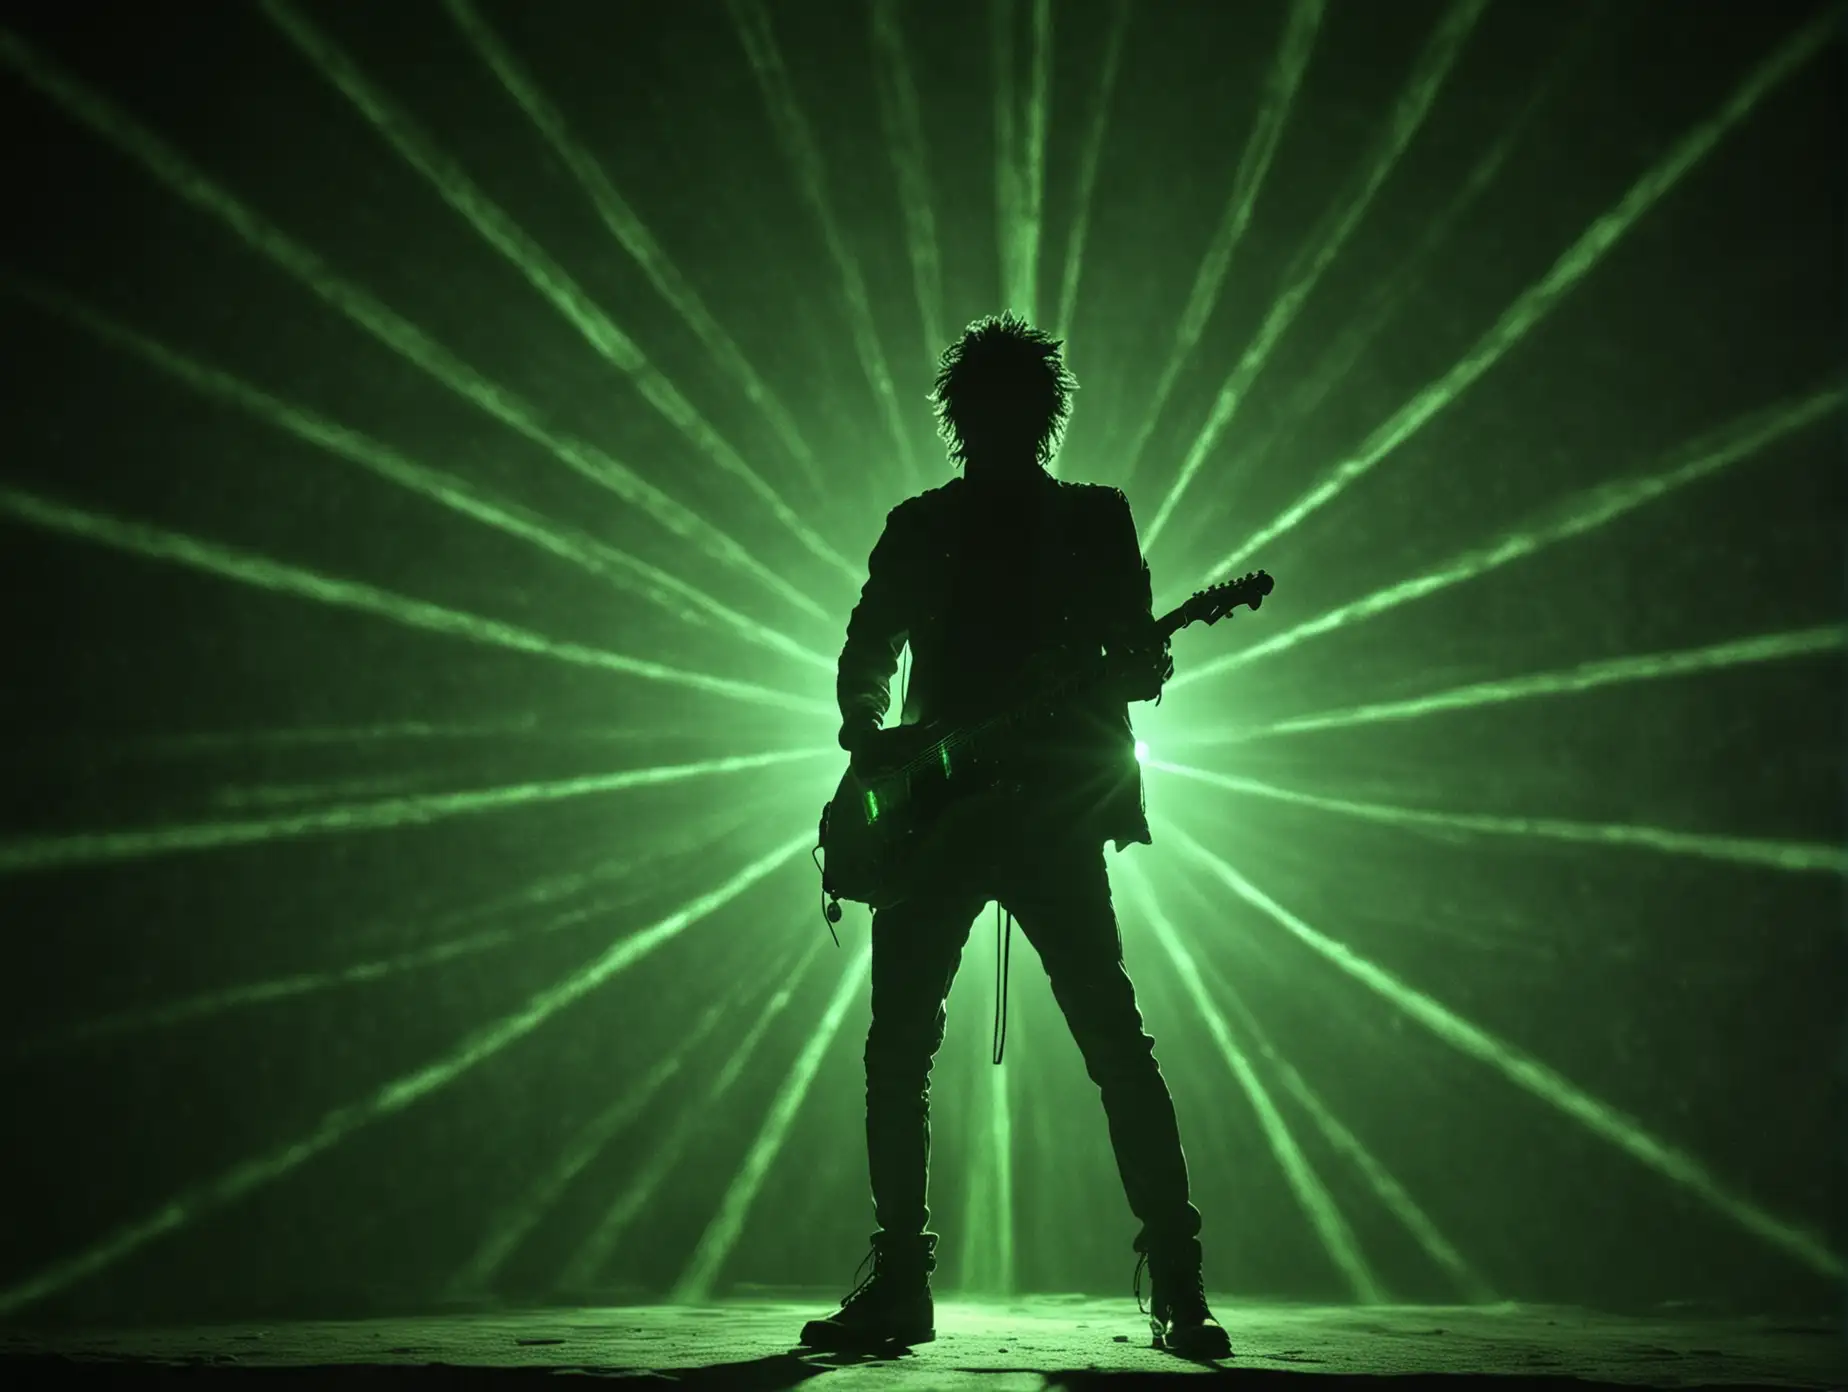 Silhouette of a Male Rock Star in a Dark Setting with Green Laser Lights